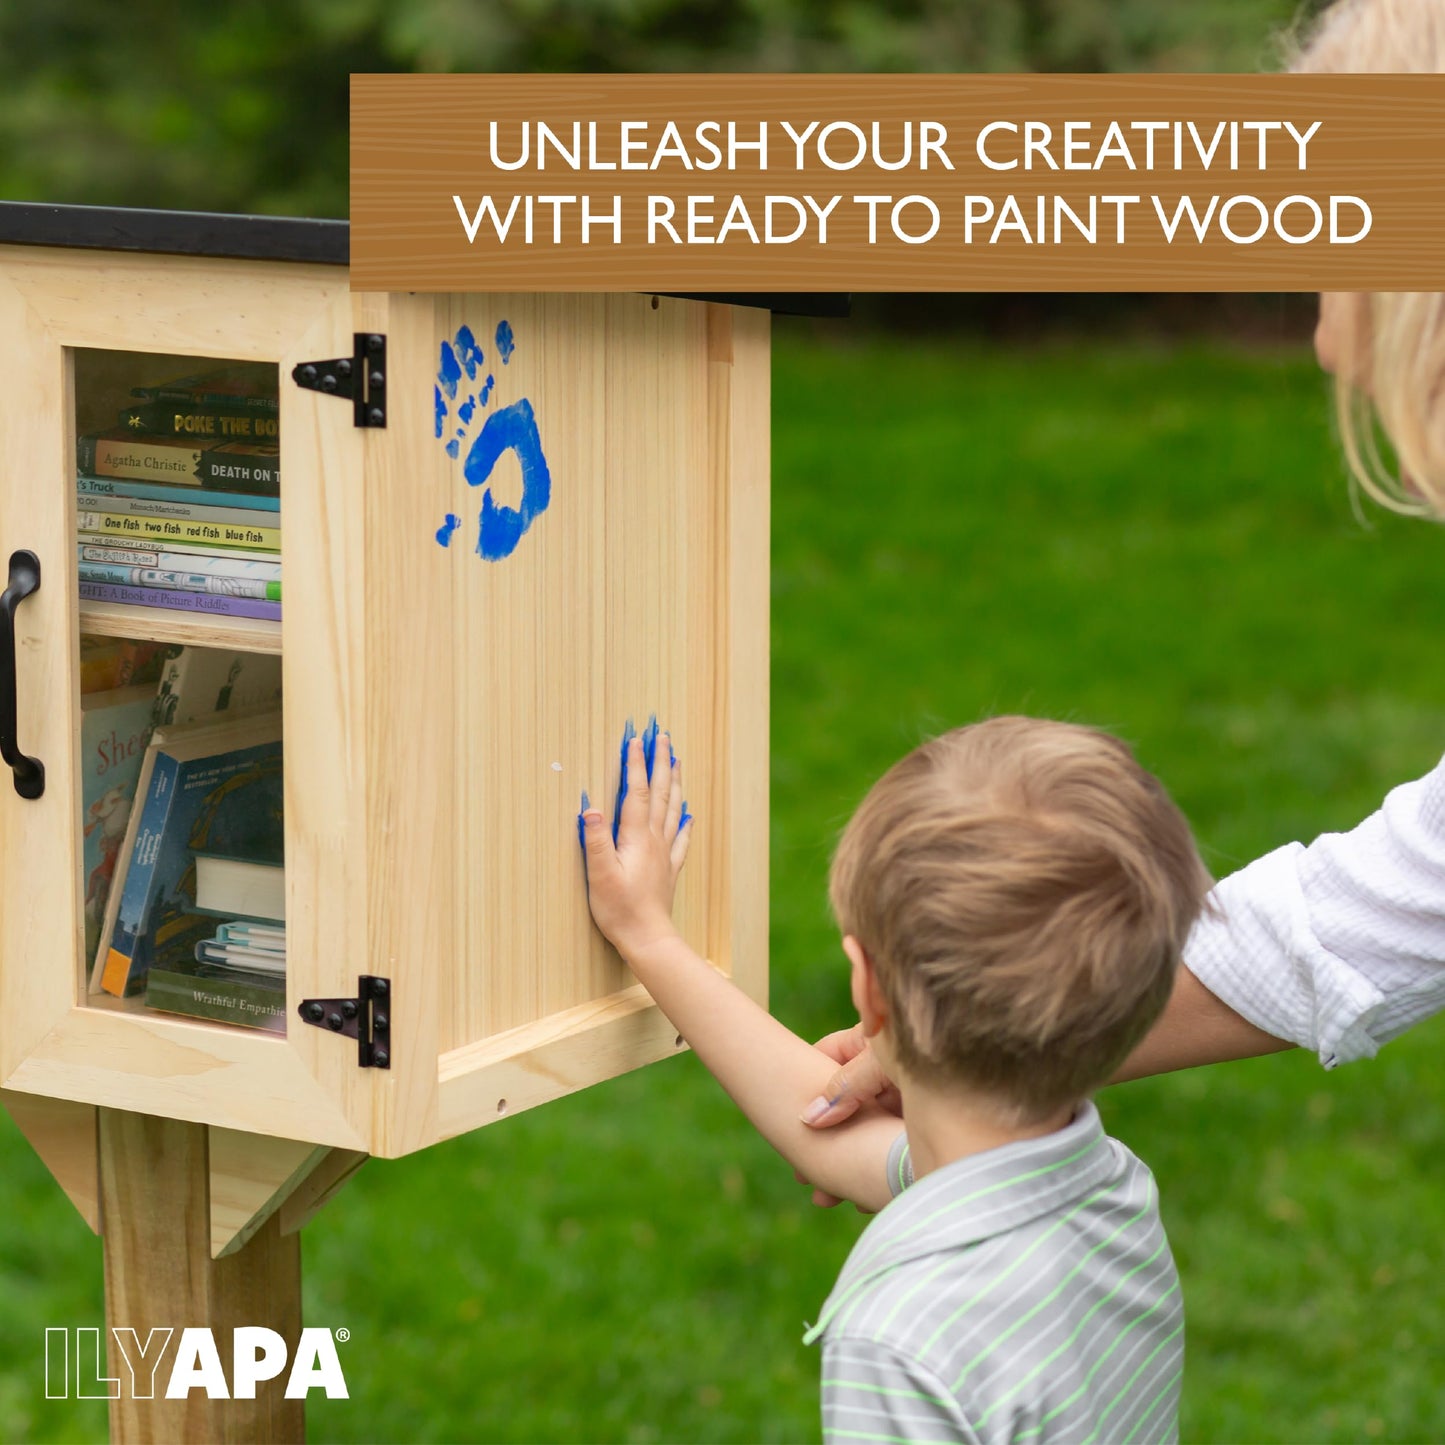 Ilyapa Little Free Library Box Outdoor Kit Free Community Book Exchange 20x14x19 inch Wood Cabinet for Sharing Literature, Books, Flyers, Food & Art with Your Neighborhood, Students or Teachers